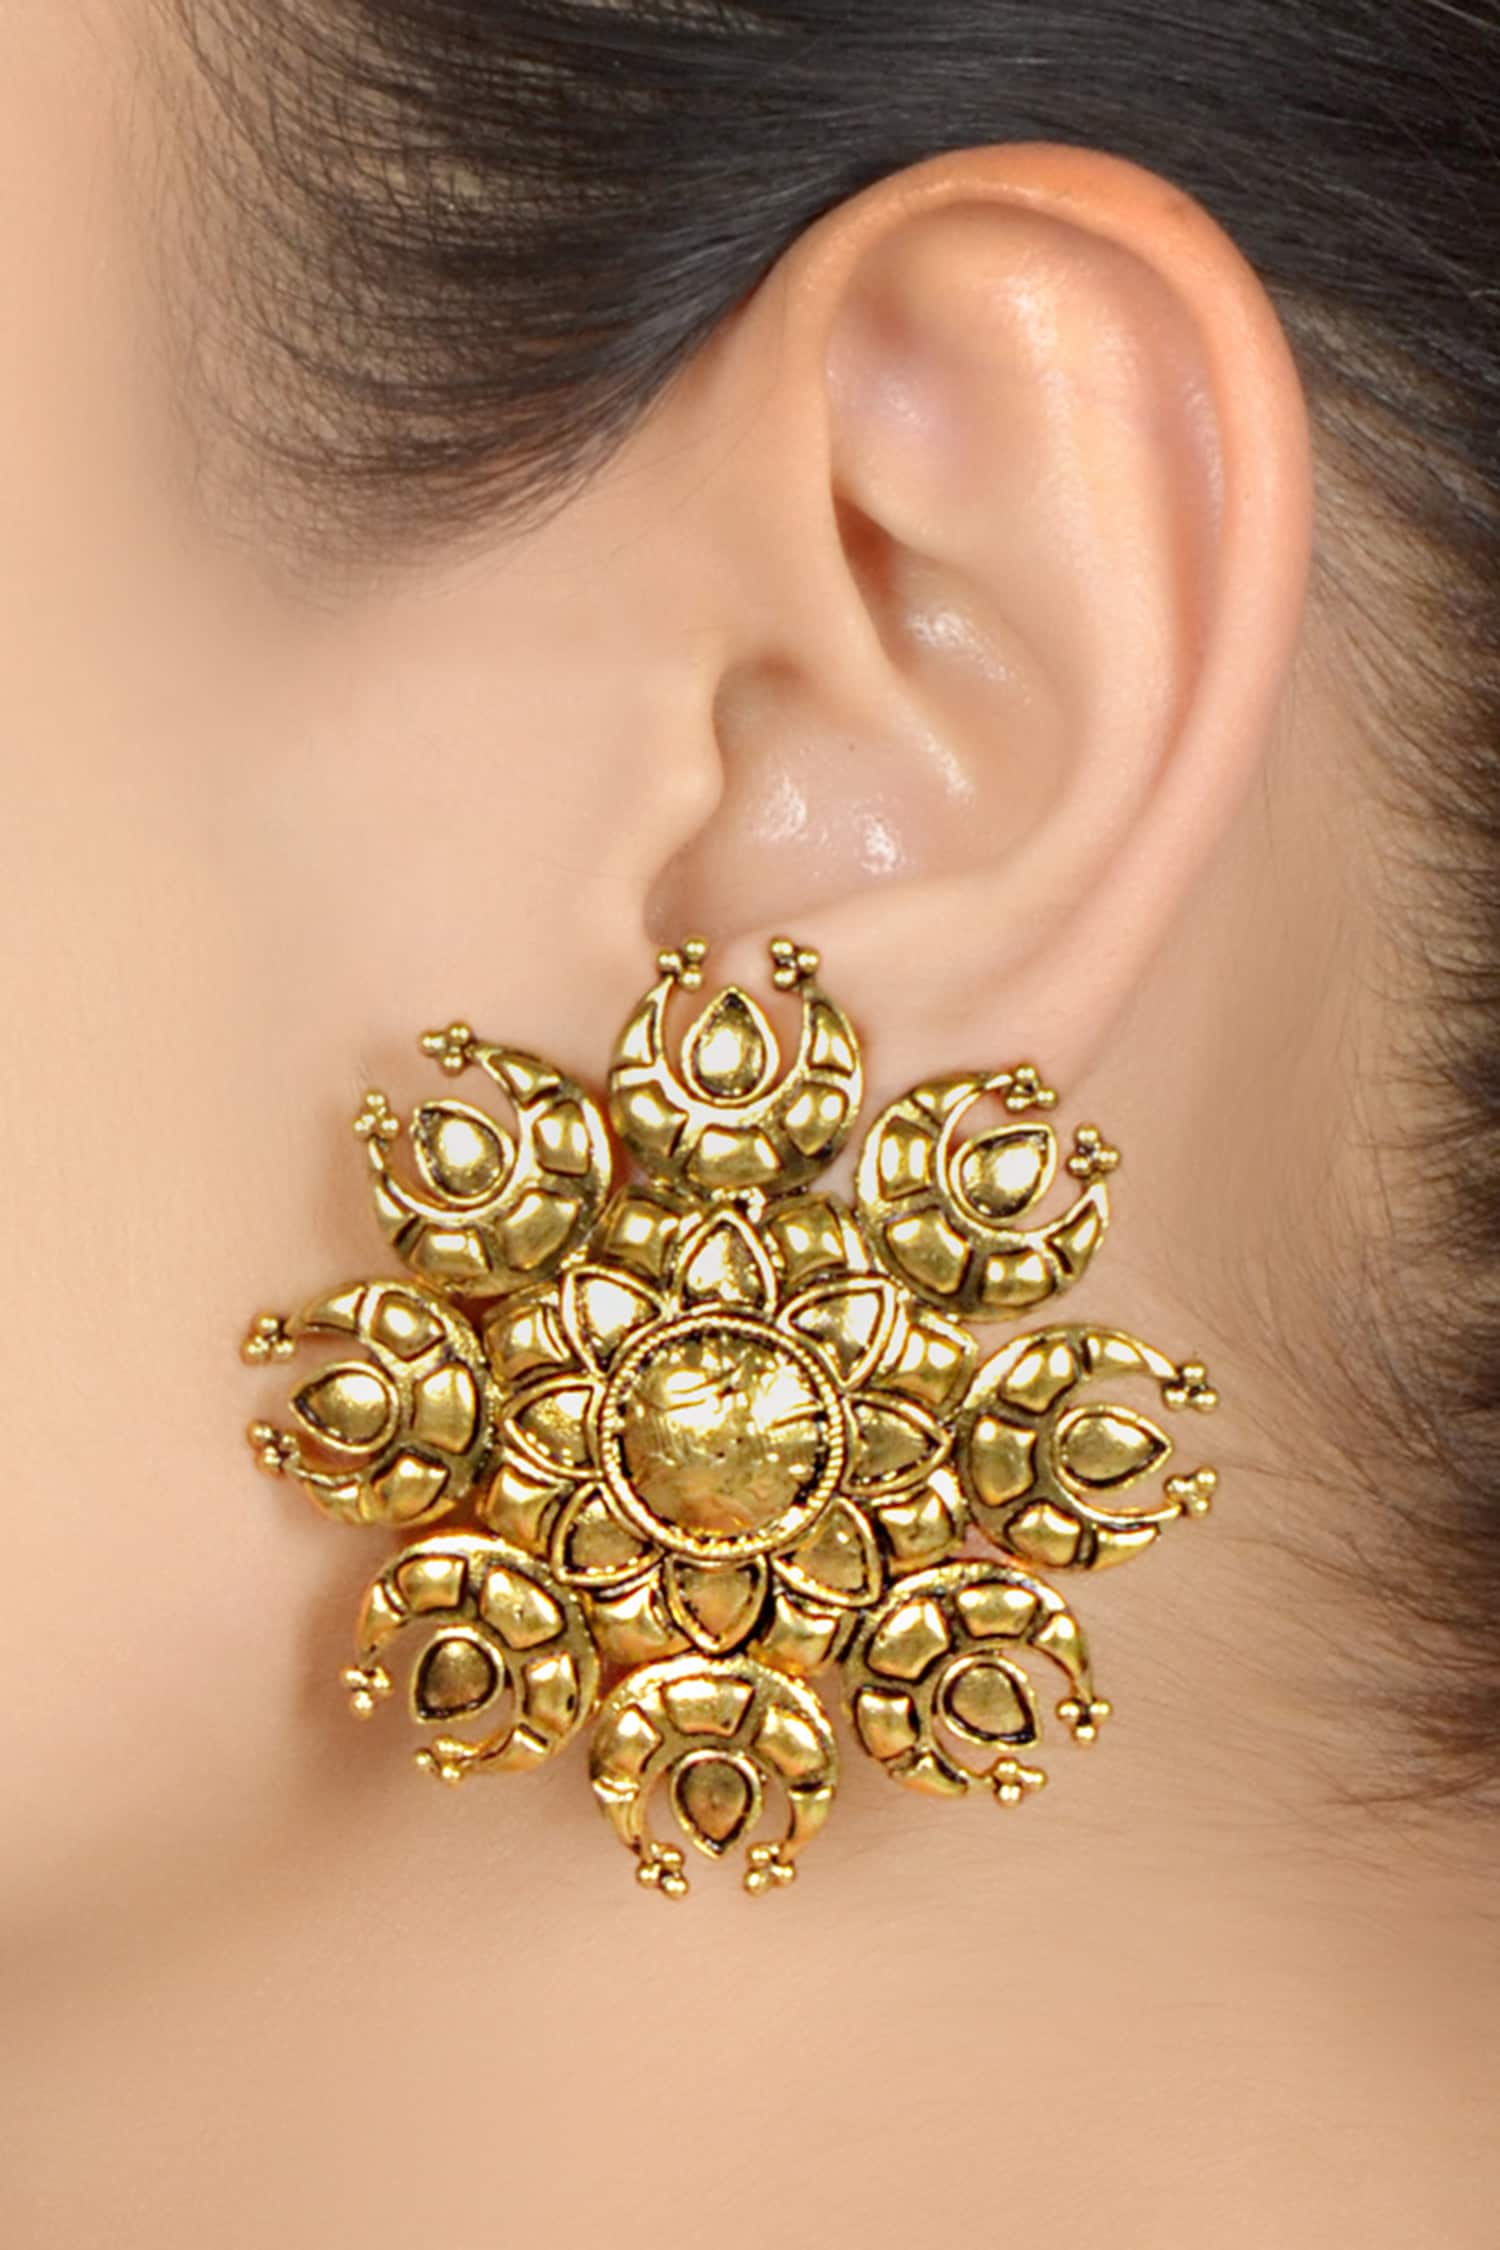 Share more than 256 traditional wedding gold earrings super hot